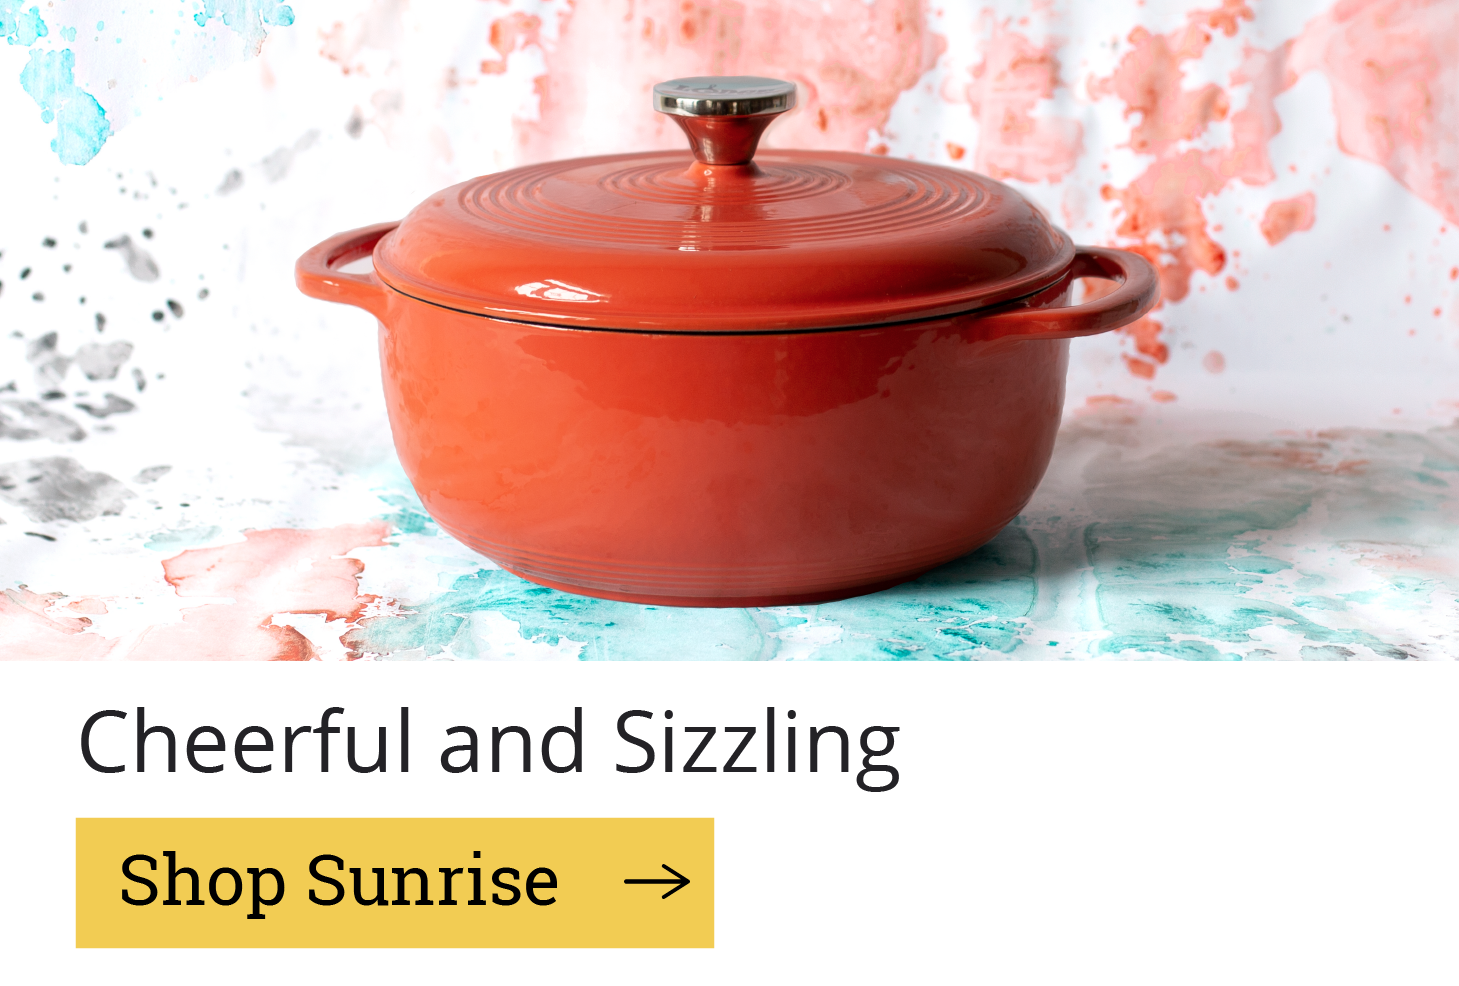 Cheerful and Sizzling [Shop Sunrise]